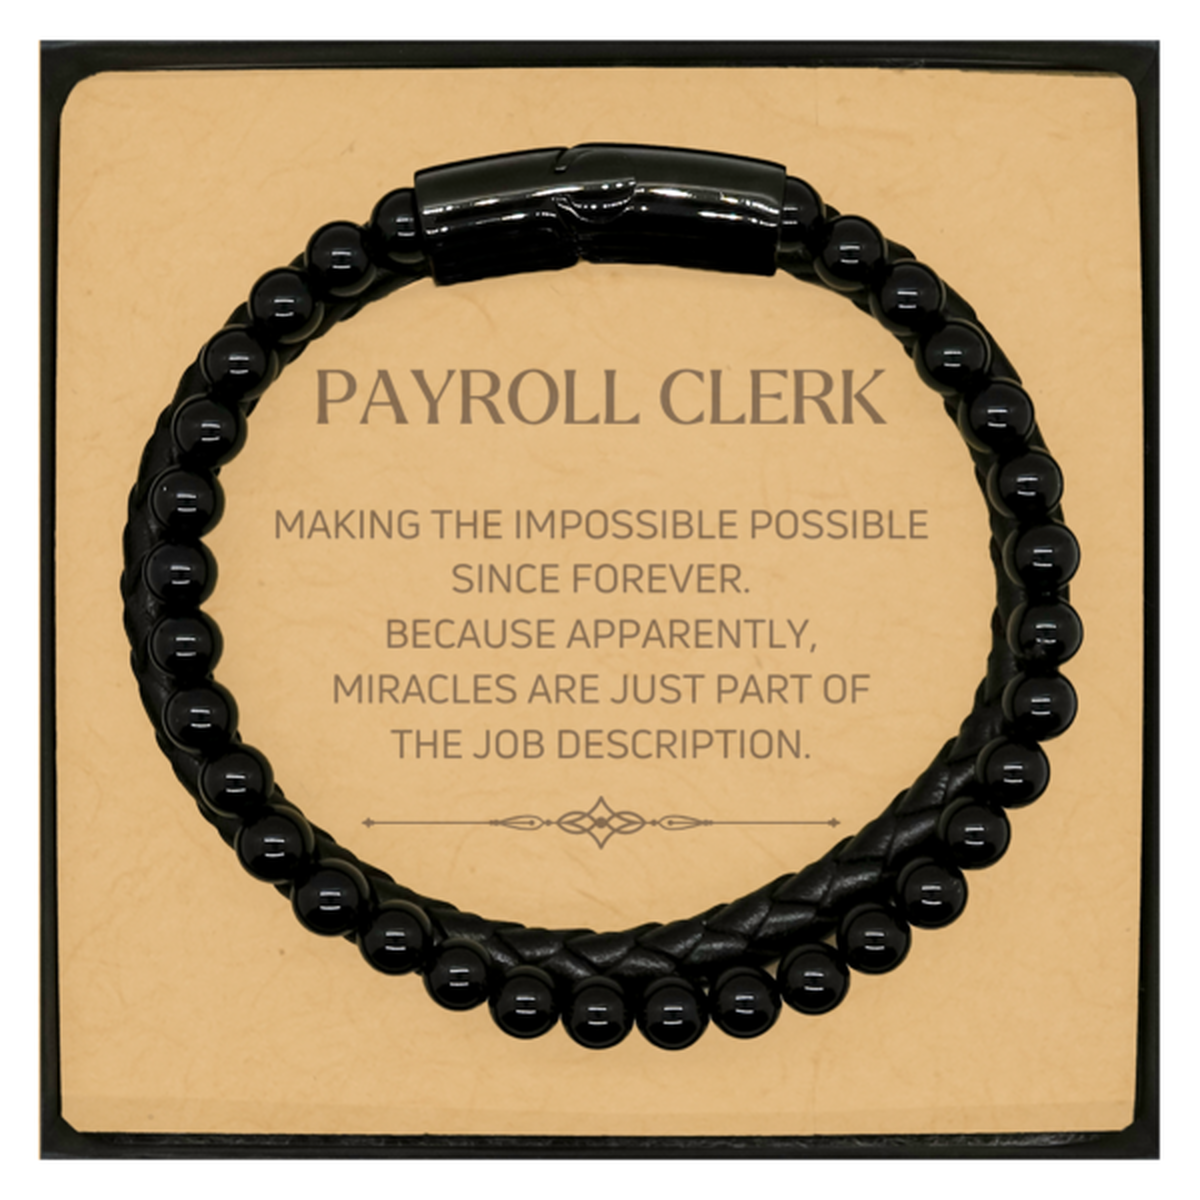 Funny Payroll Clerk Gifts, Miracles are just part of the job description, Inspirational Birthday Christmas Stone Leather Bracelets For Payroll Clerk, Men, Women, Coworkers, Friends, Boss